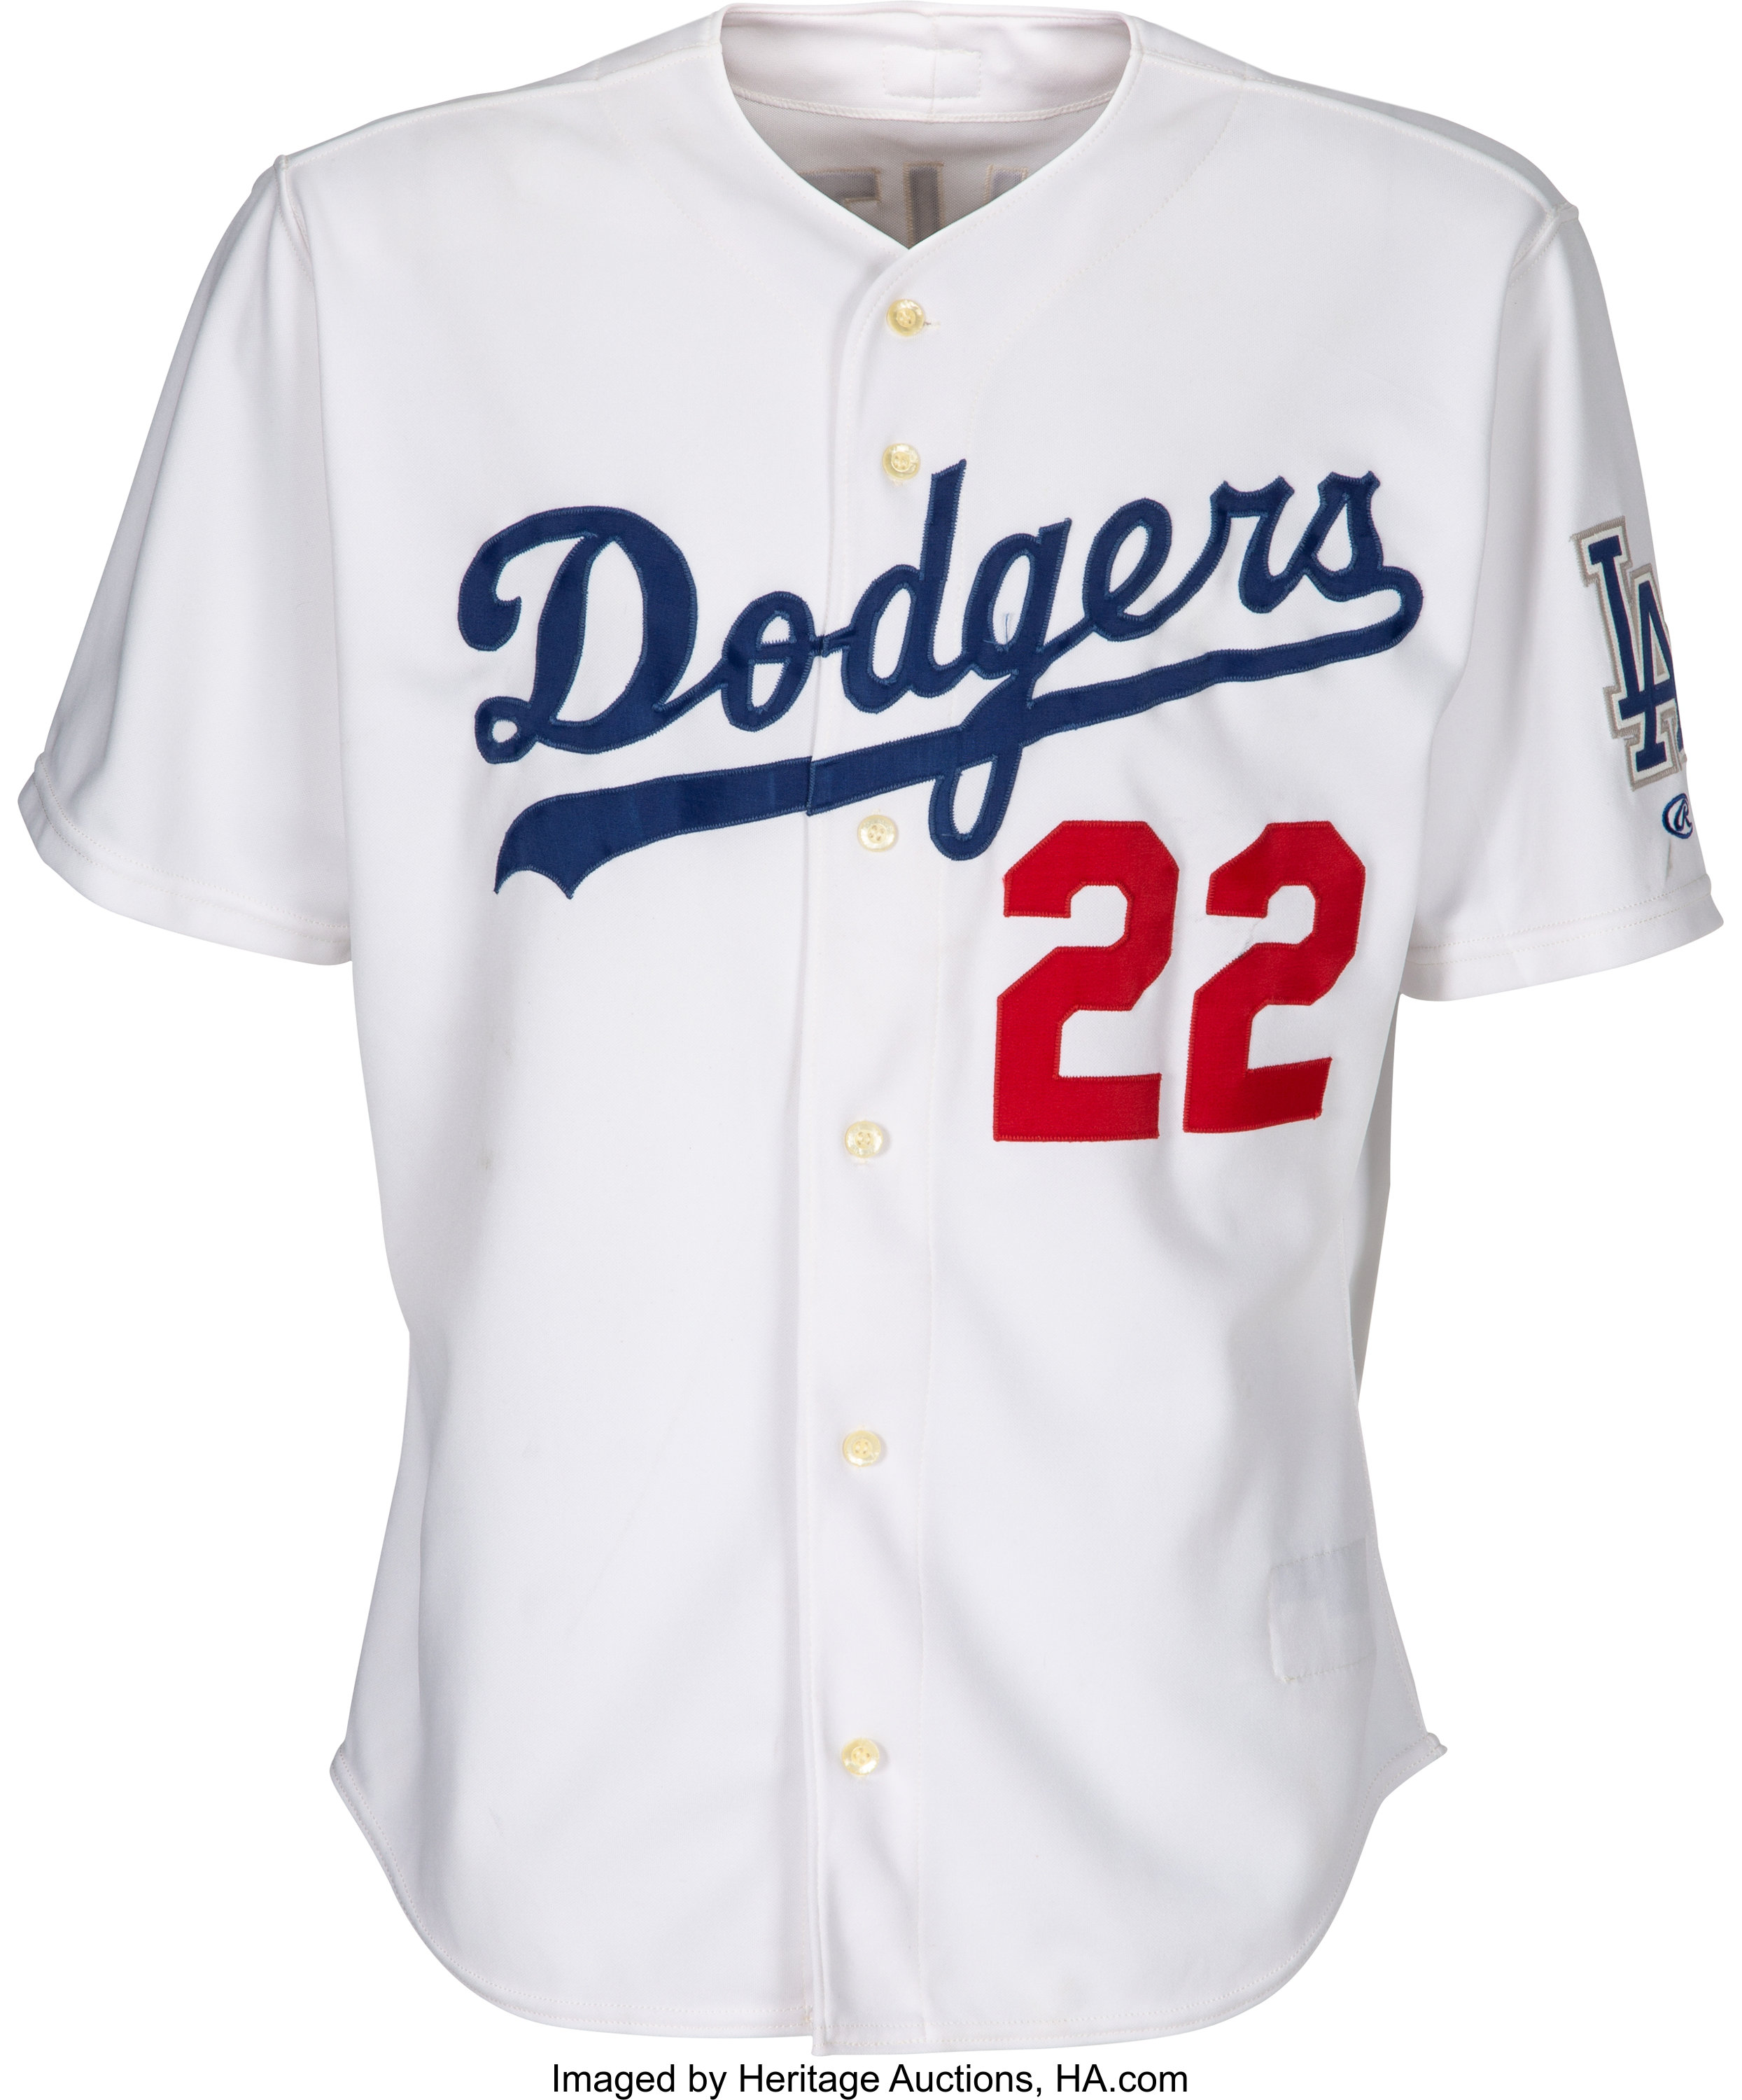 2000 Los Angeles Dodgers Game Worn Jersey from The Devon White Lot